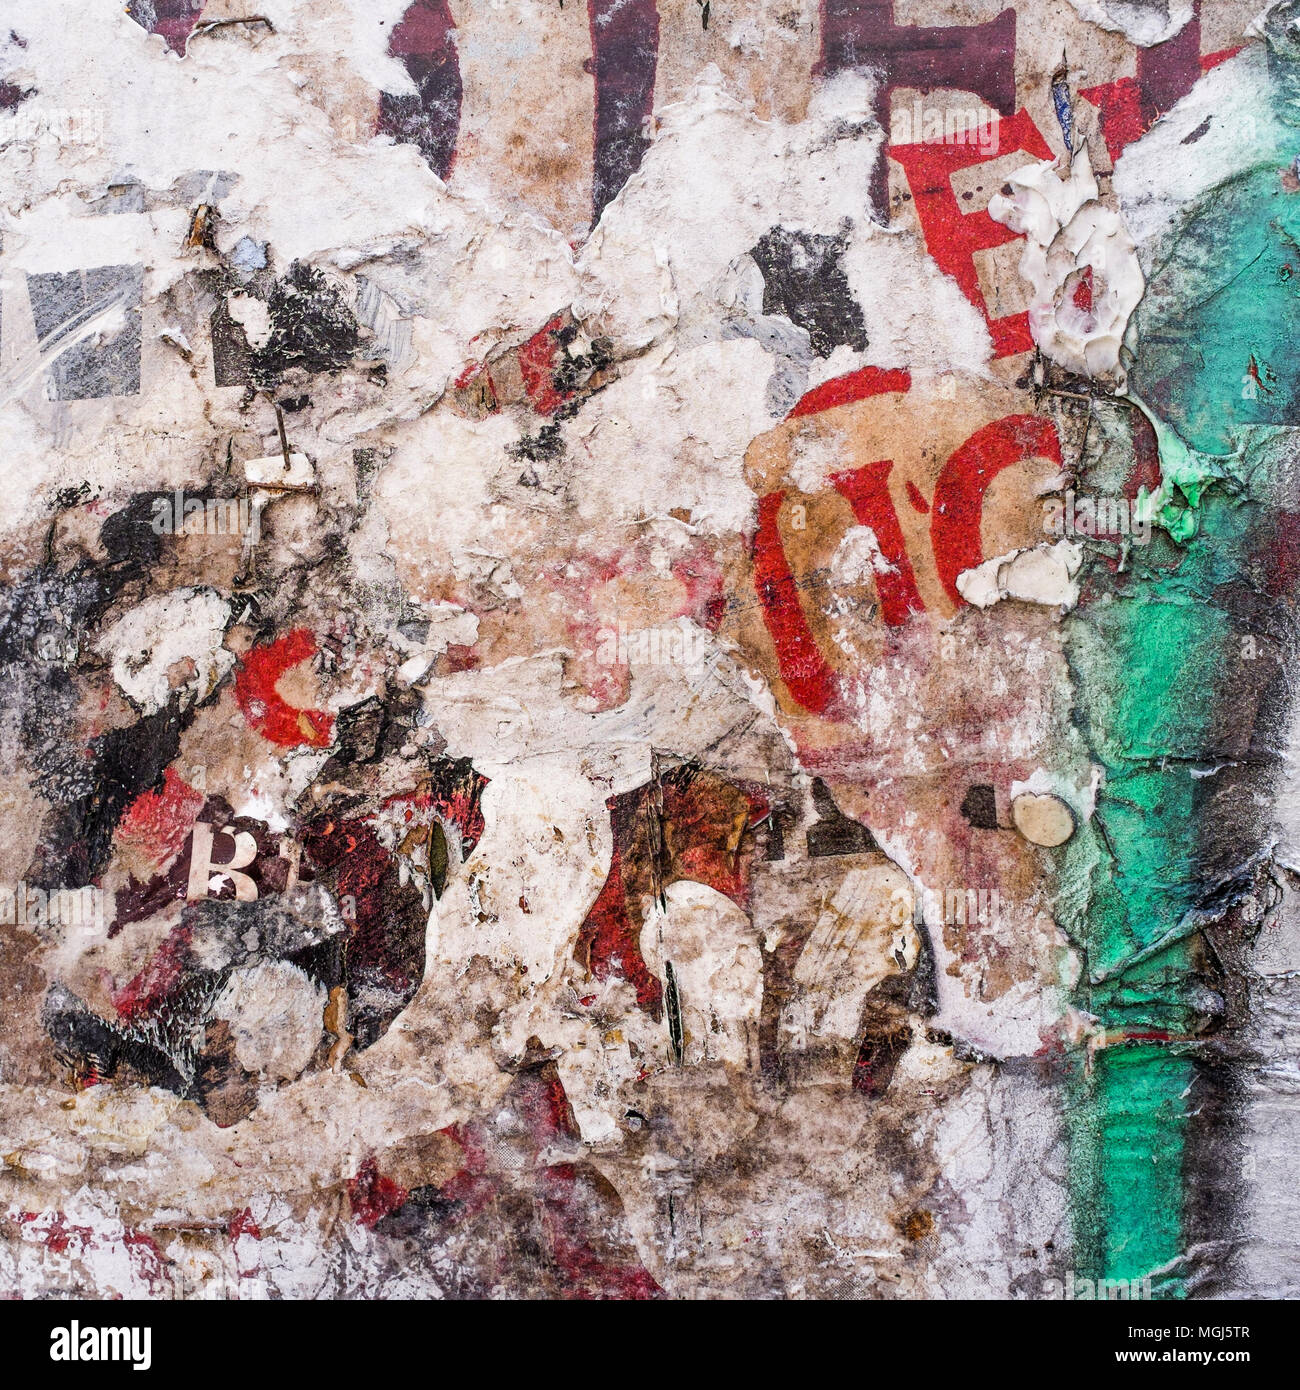 Urban Collage / Décollage. Remnants of torn posters on wall, London, UK Stock Photo